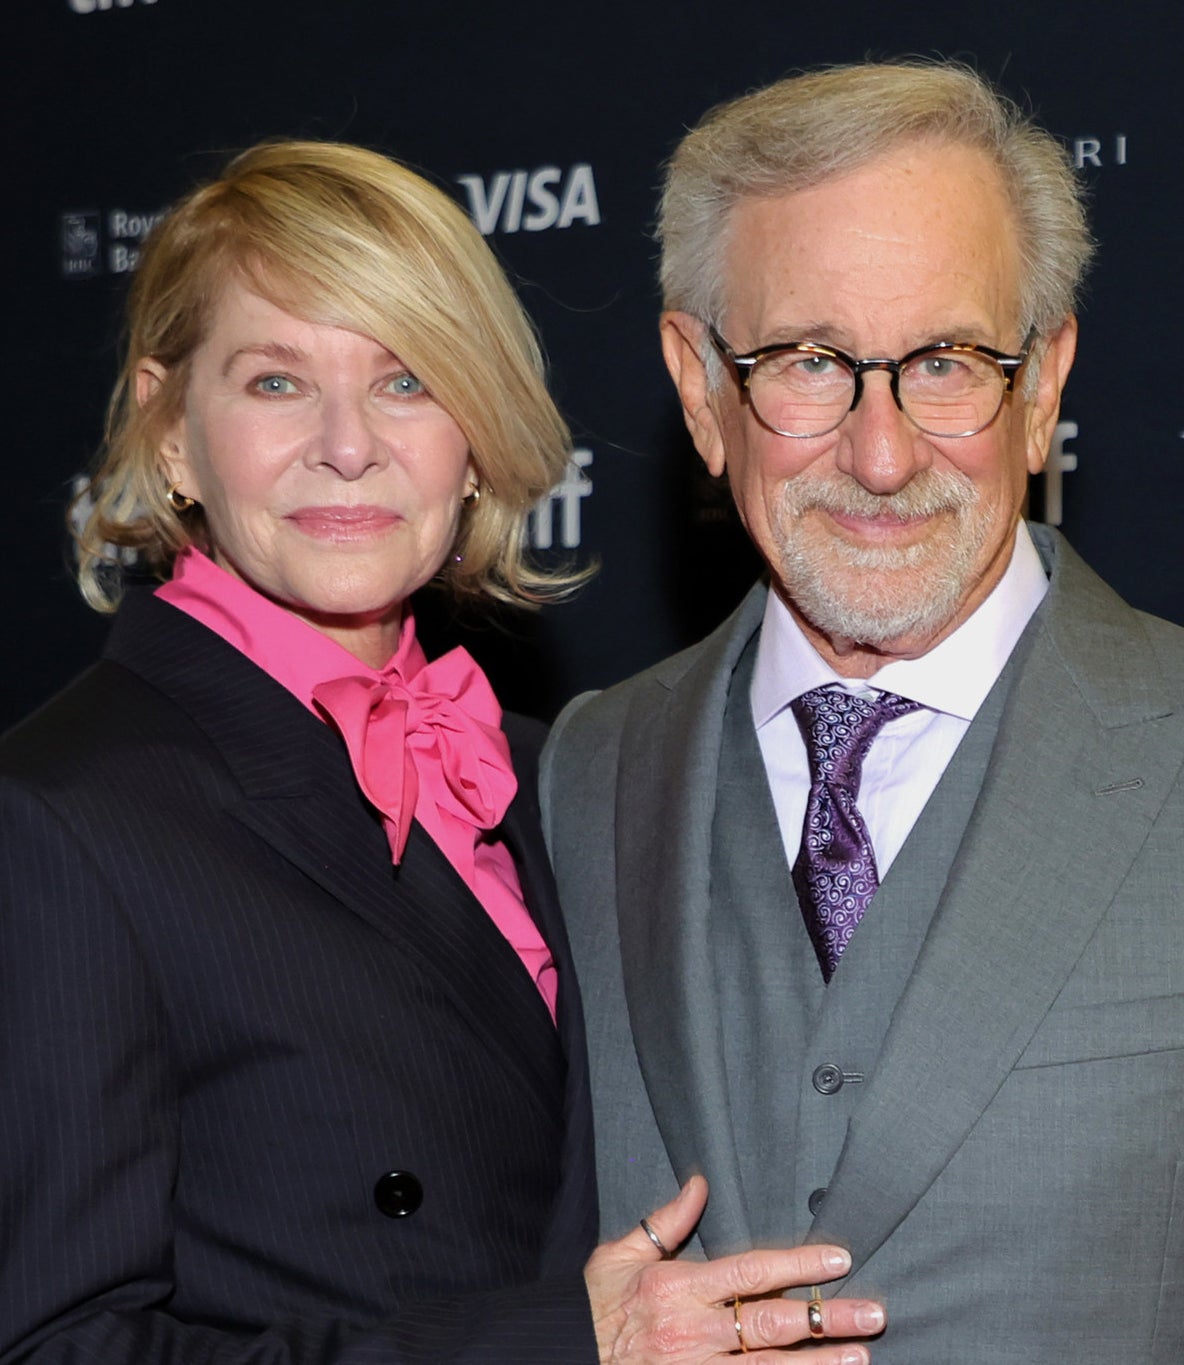 Steven Spielberg and his wife